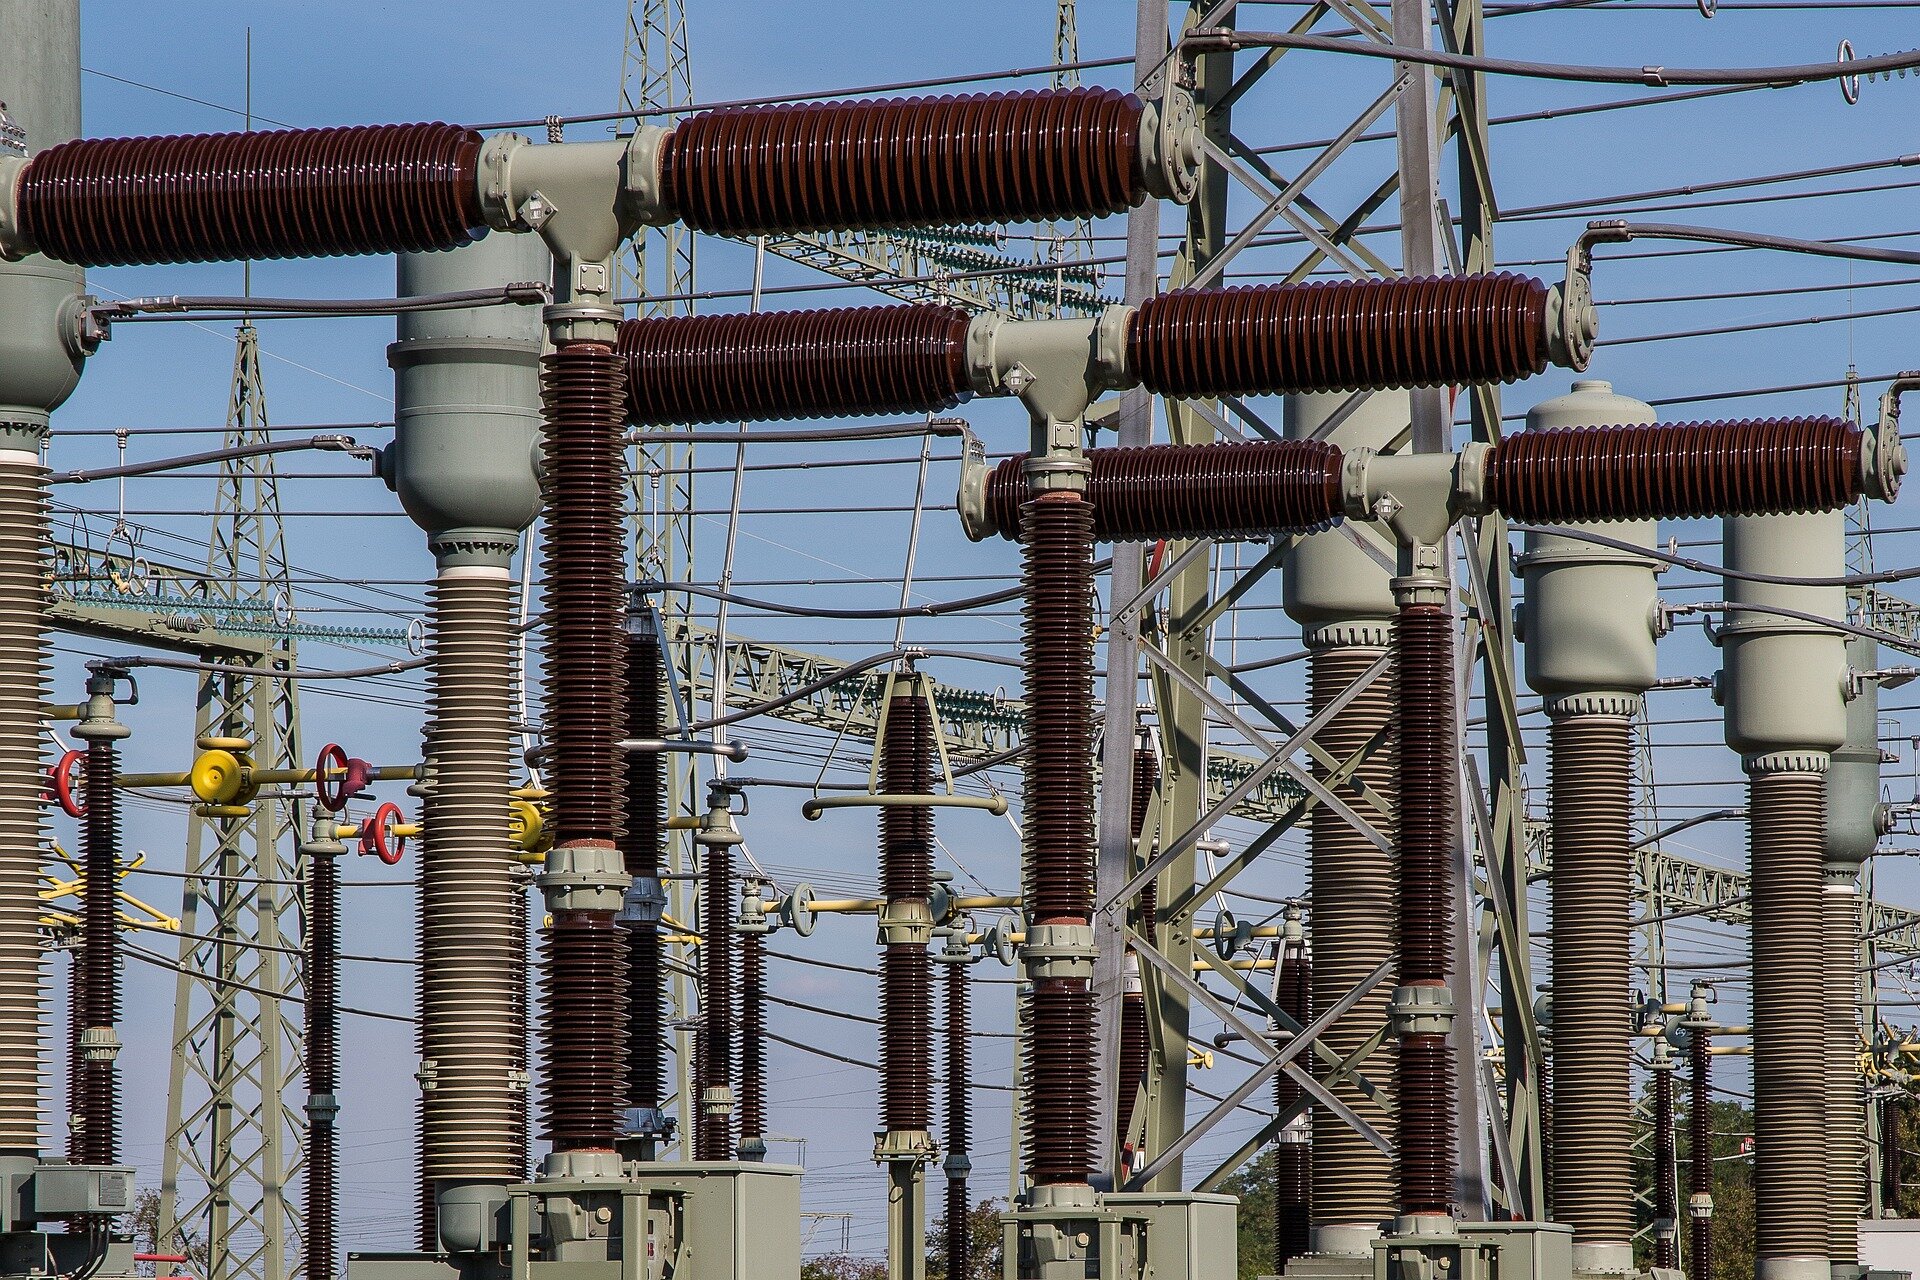 Attacks on power substations are growing: Why is the electric grid so hard to protect?